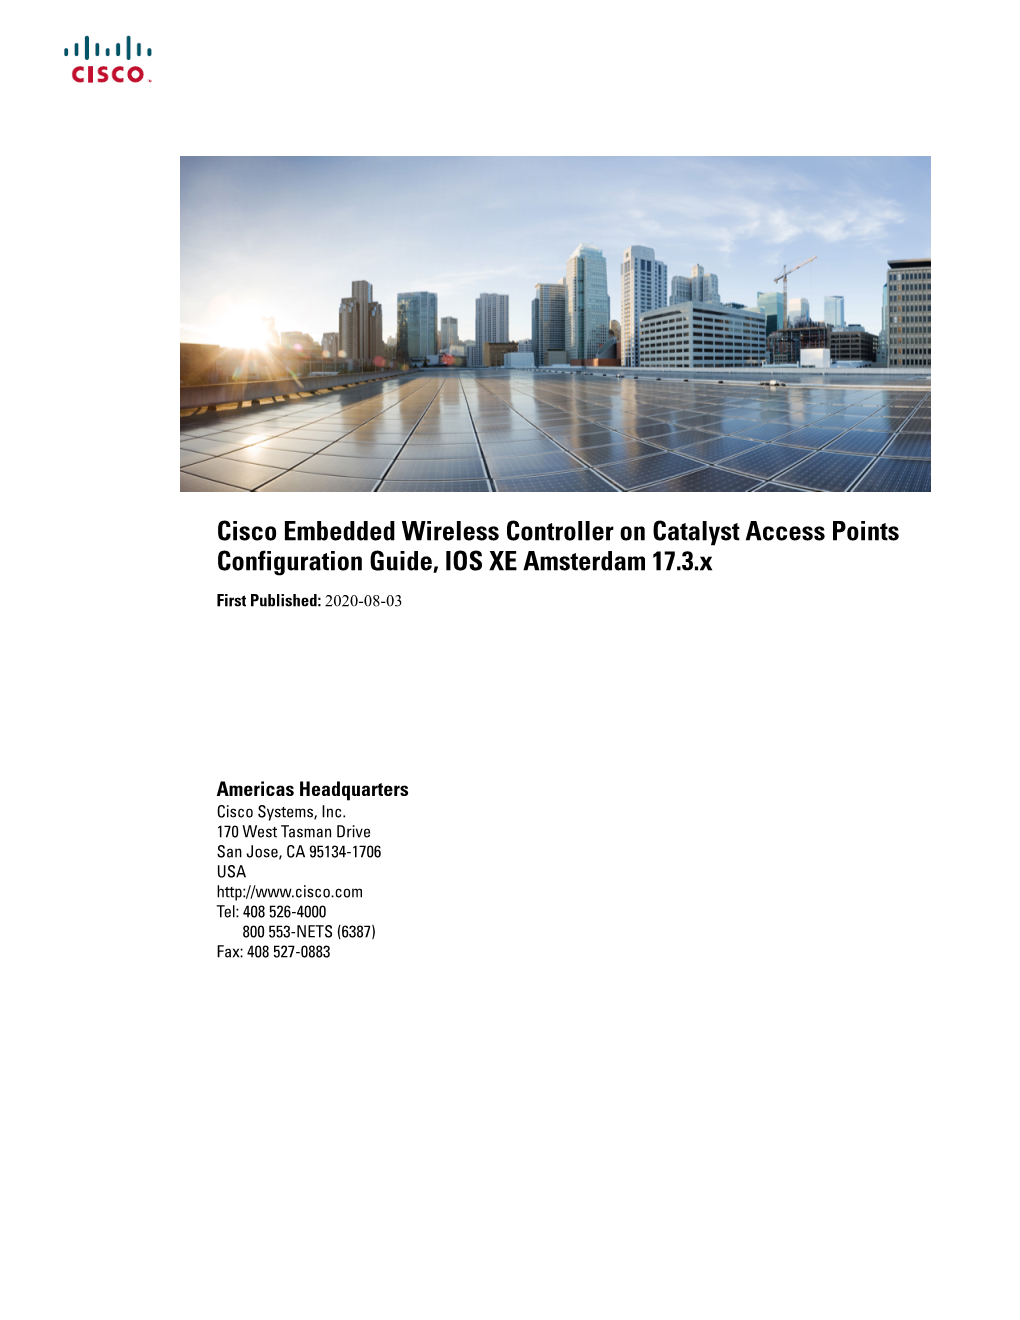 Cisco Embedded Wireless Controller on Catalyst Access Points Configuration Guide, IOS XE Amsterdam 17.3.X